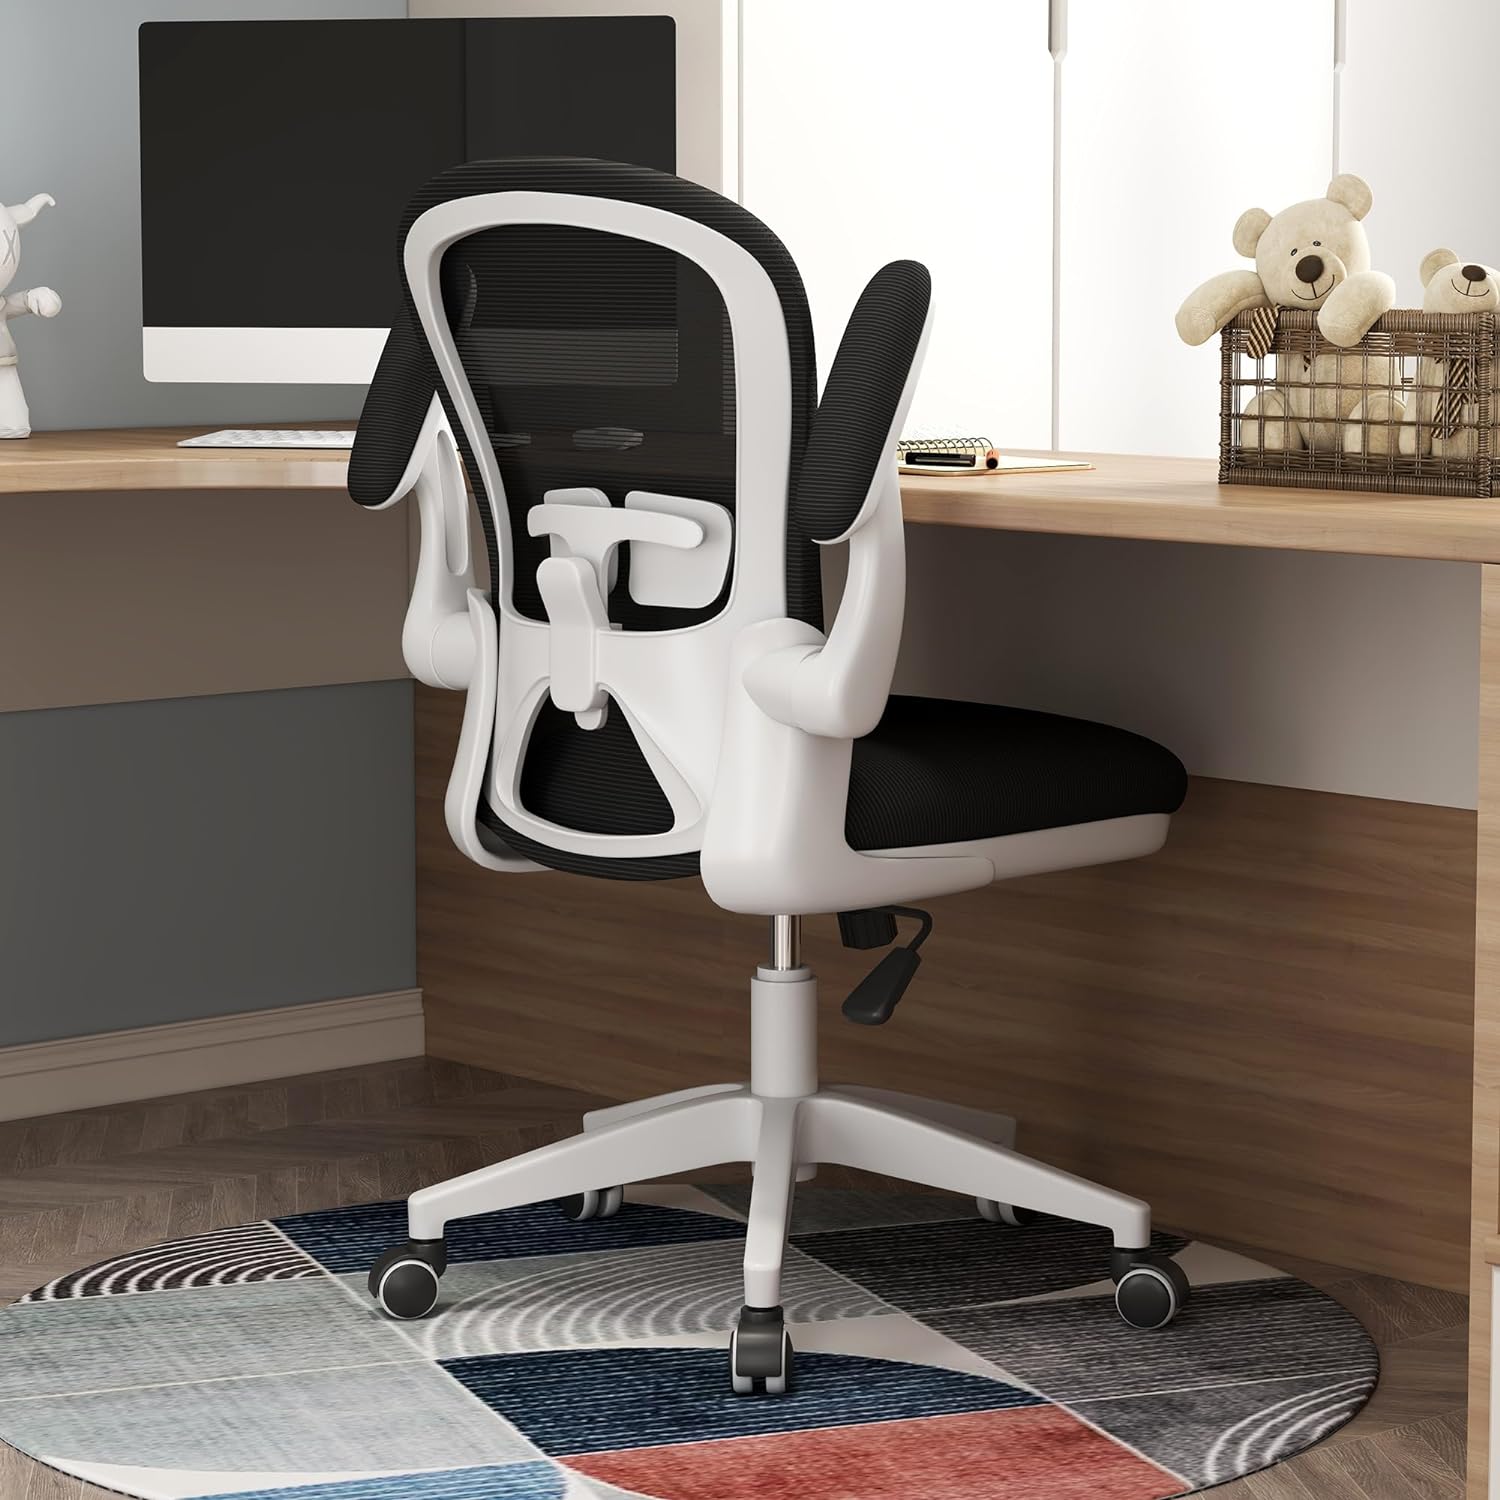 Apusen Ergonomic Office Chairs with Adjustable Lumbar Support,Mesh Desk Chair with Adjustable Arms and Wheels,Computer Desk Chair for Home Office EssentialsNo Headrests,White